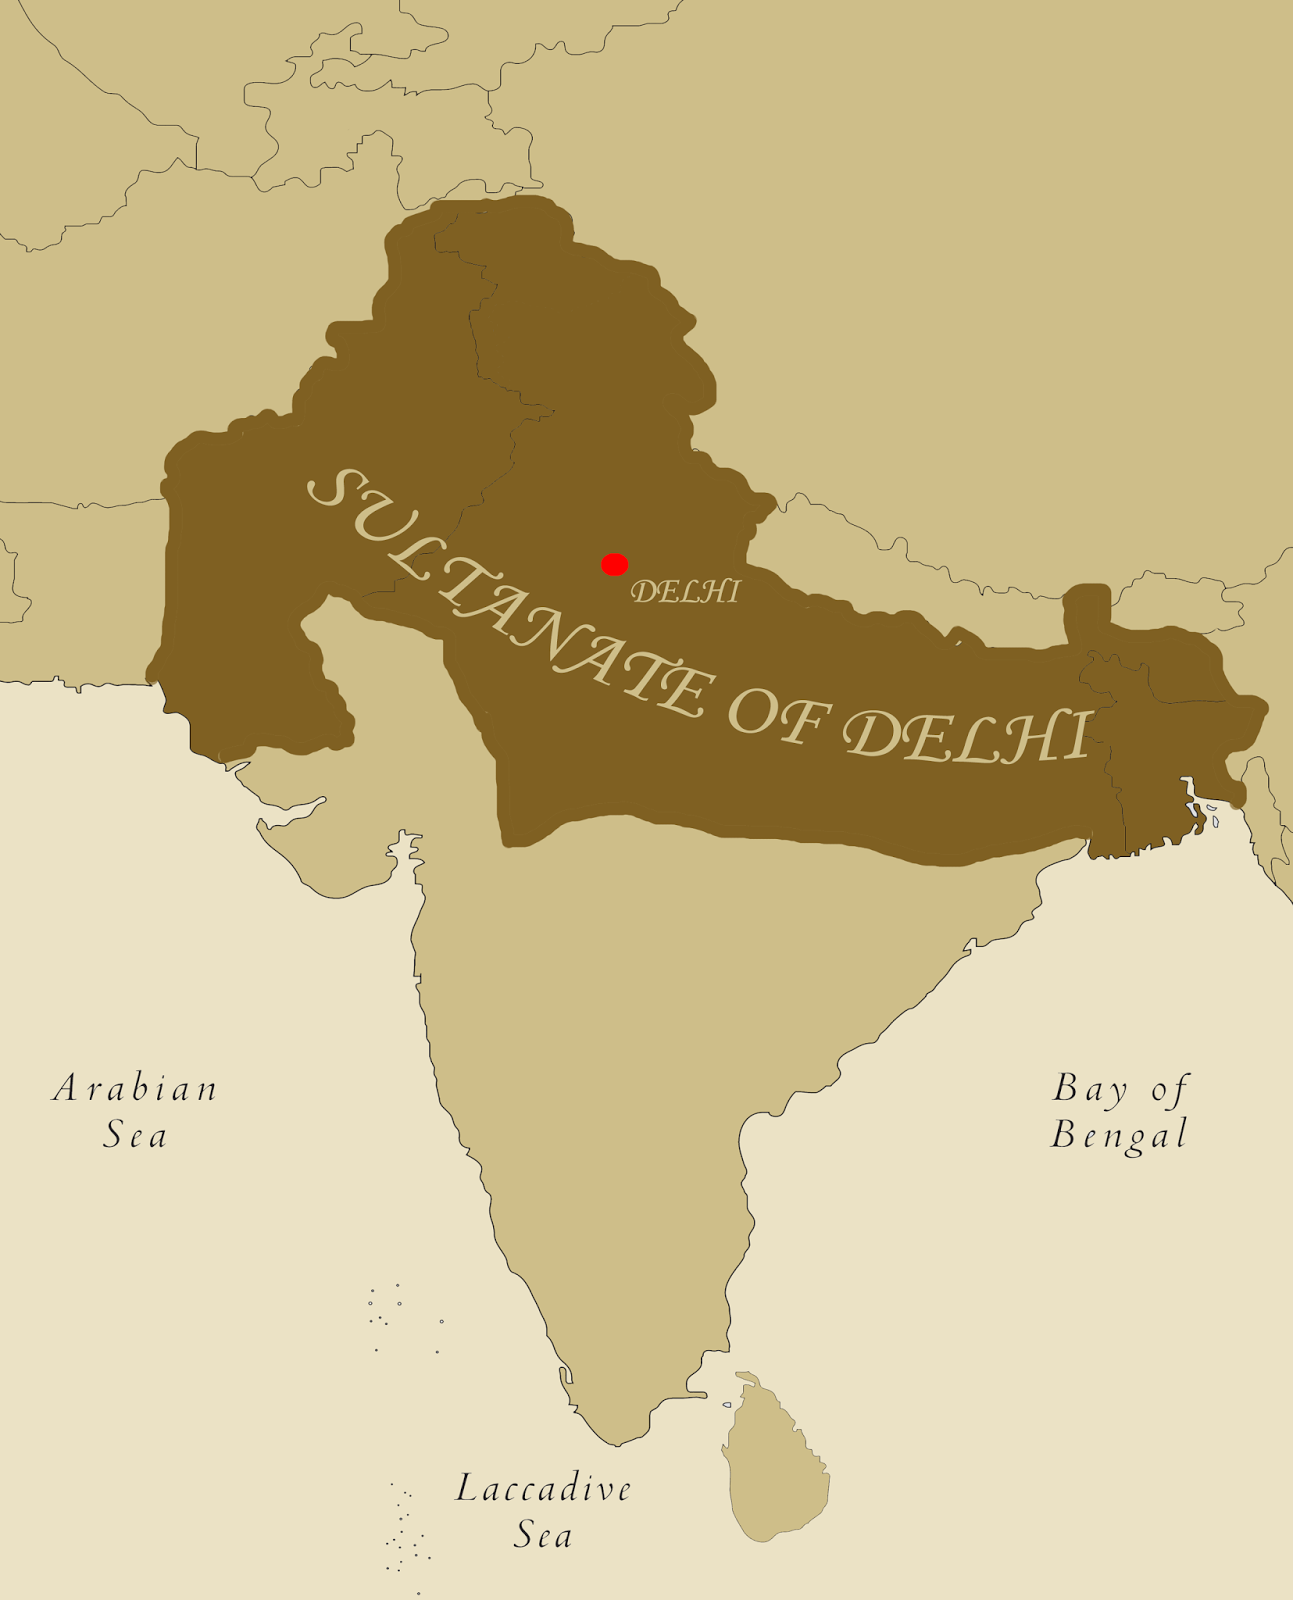 write an essay on the administration of delhi sultanate period